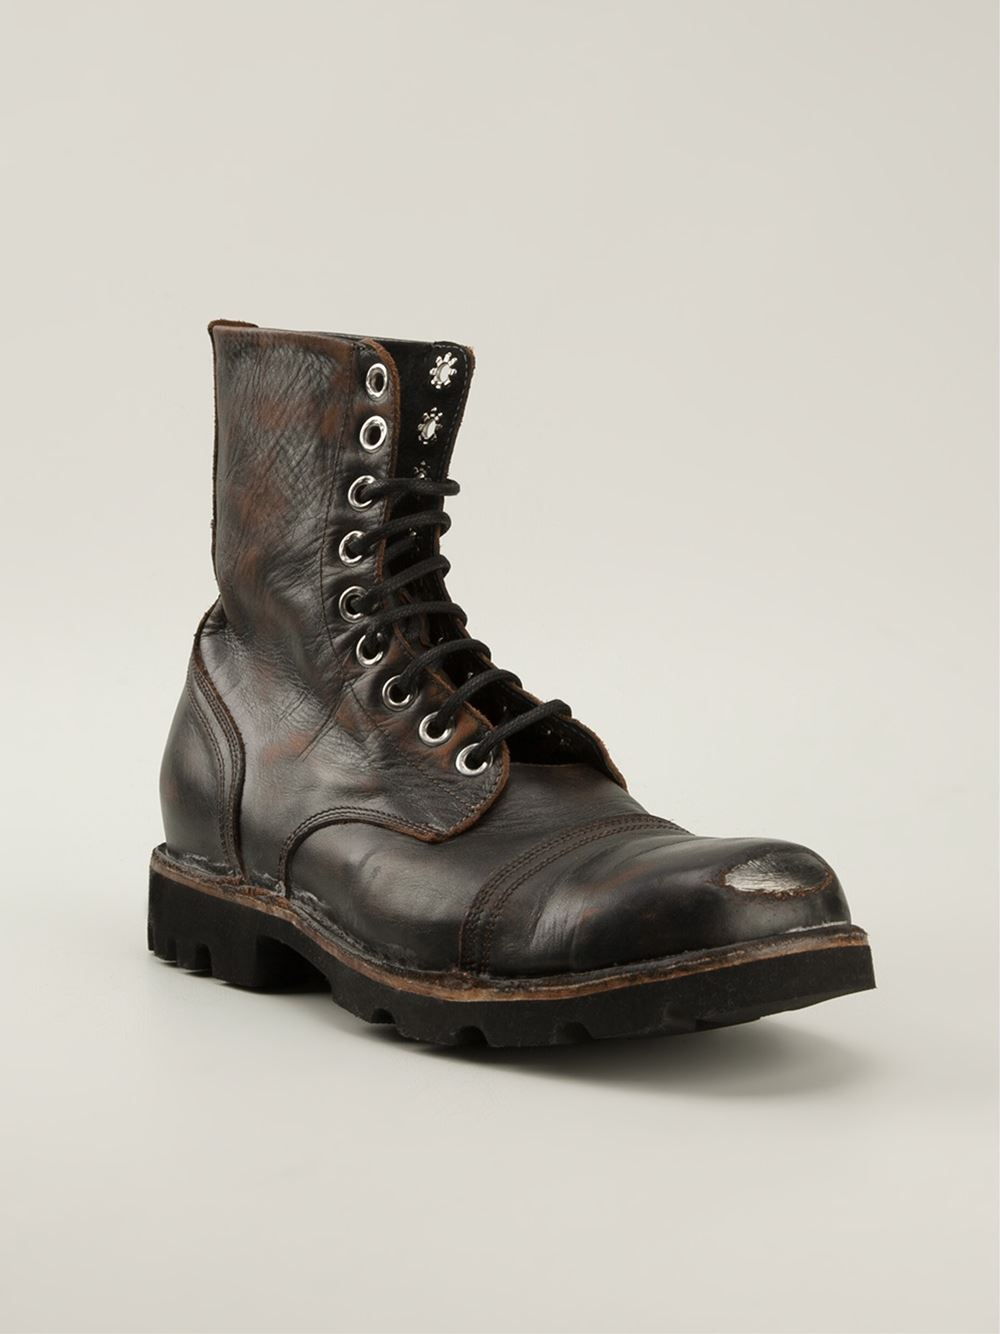 DIESEL 'Steel' Lace Up Boots in Black for Men - Lyst